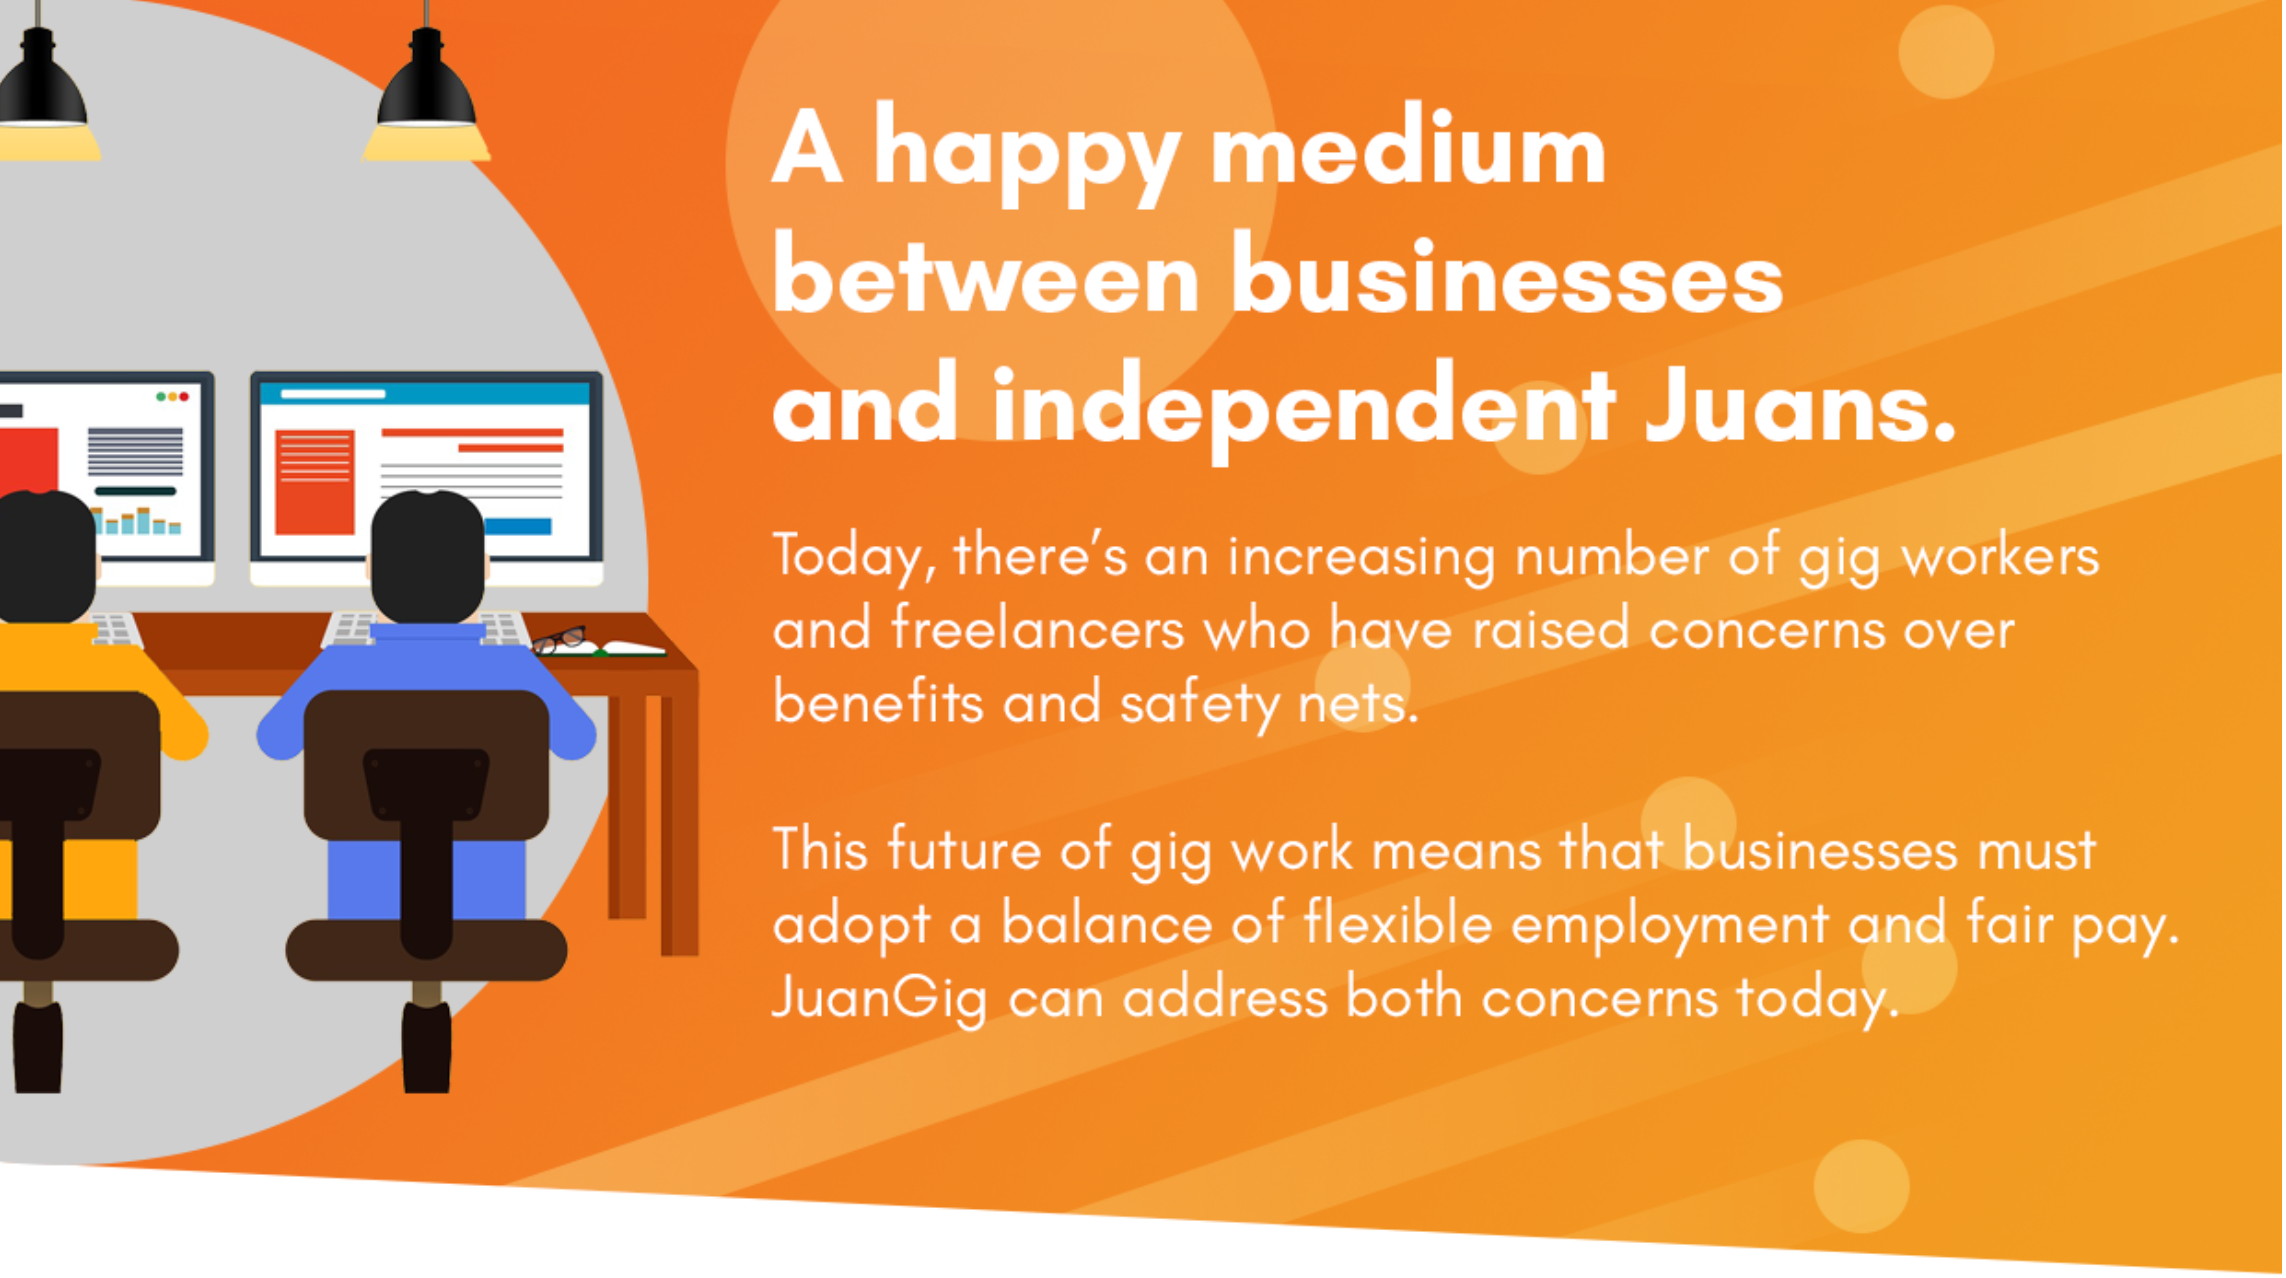 A happy medium between businesses and independent Juans. Today, there's an increasing number of gig workers and freelancers who have raised concerns over benefits and safety nets. This future of gig work means that businesses must adopt a balance of flexible employment and fair pay. JuanGig can address both concerns today.